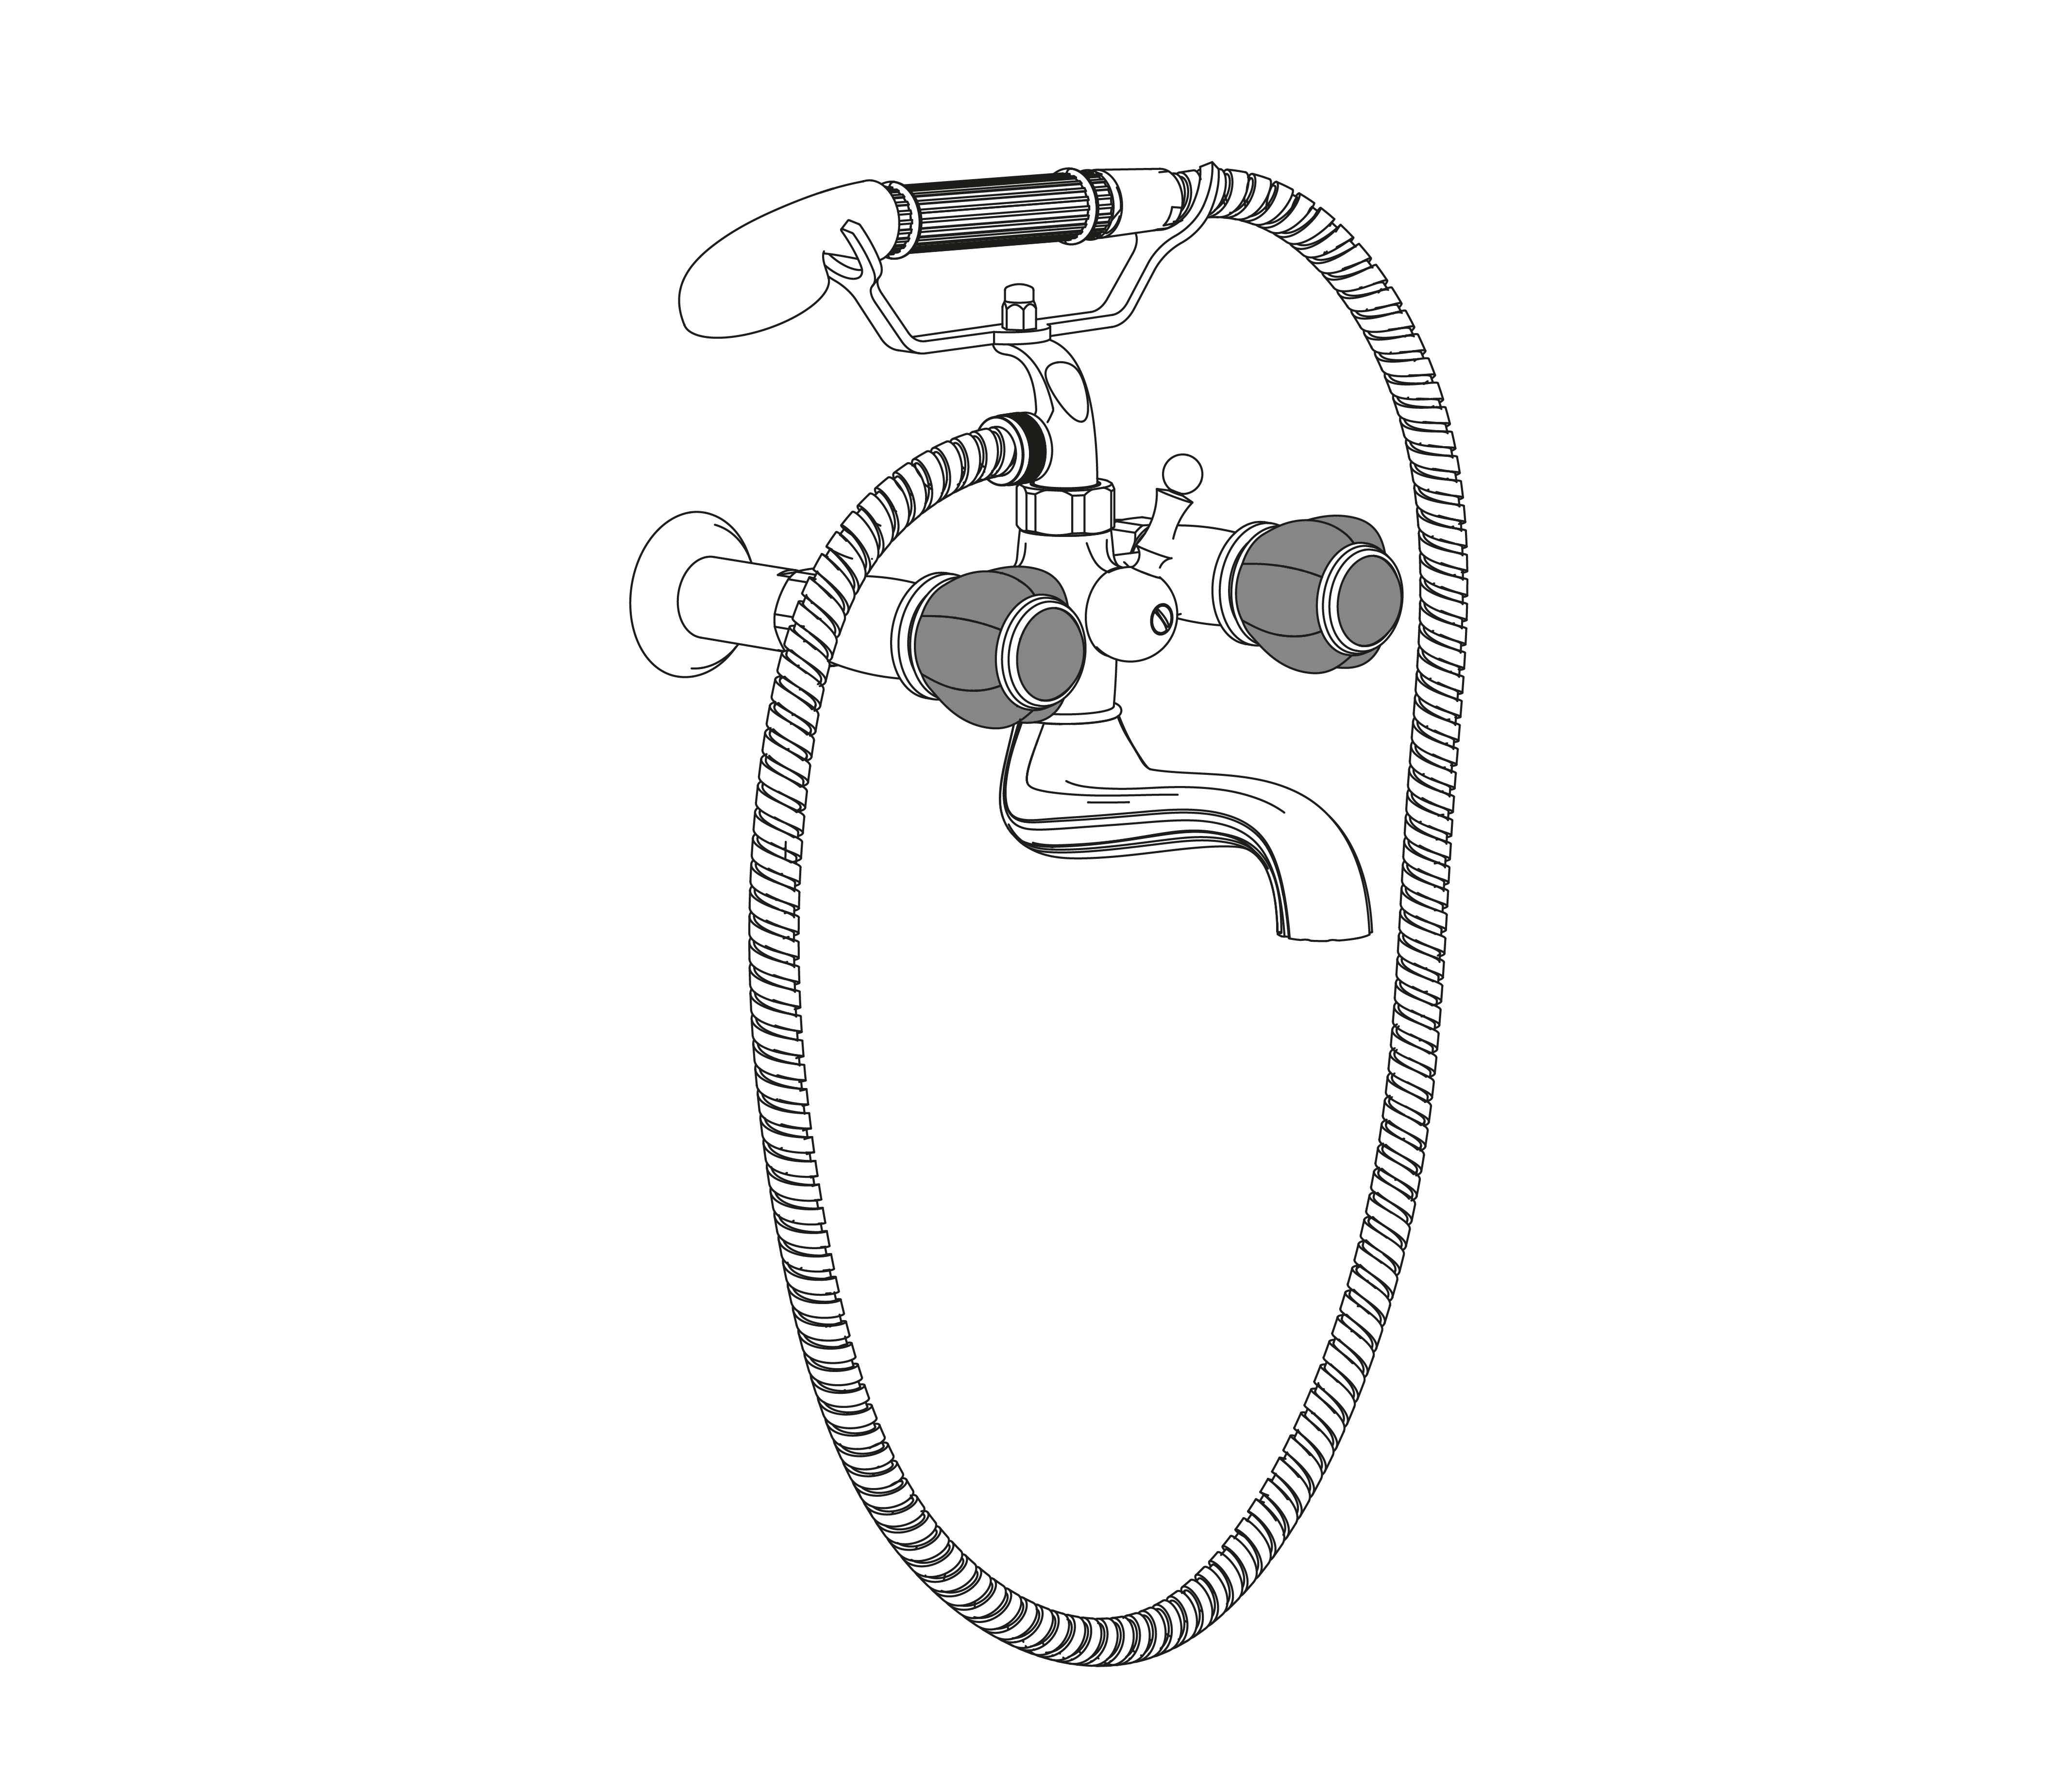 S153-3201 Wall mounted bath and shower mixer